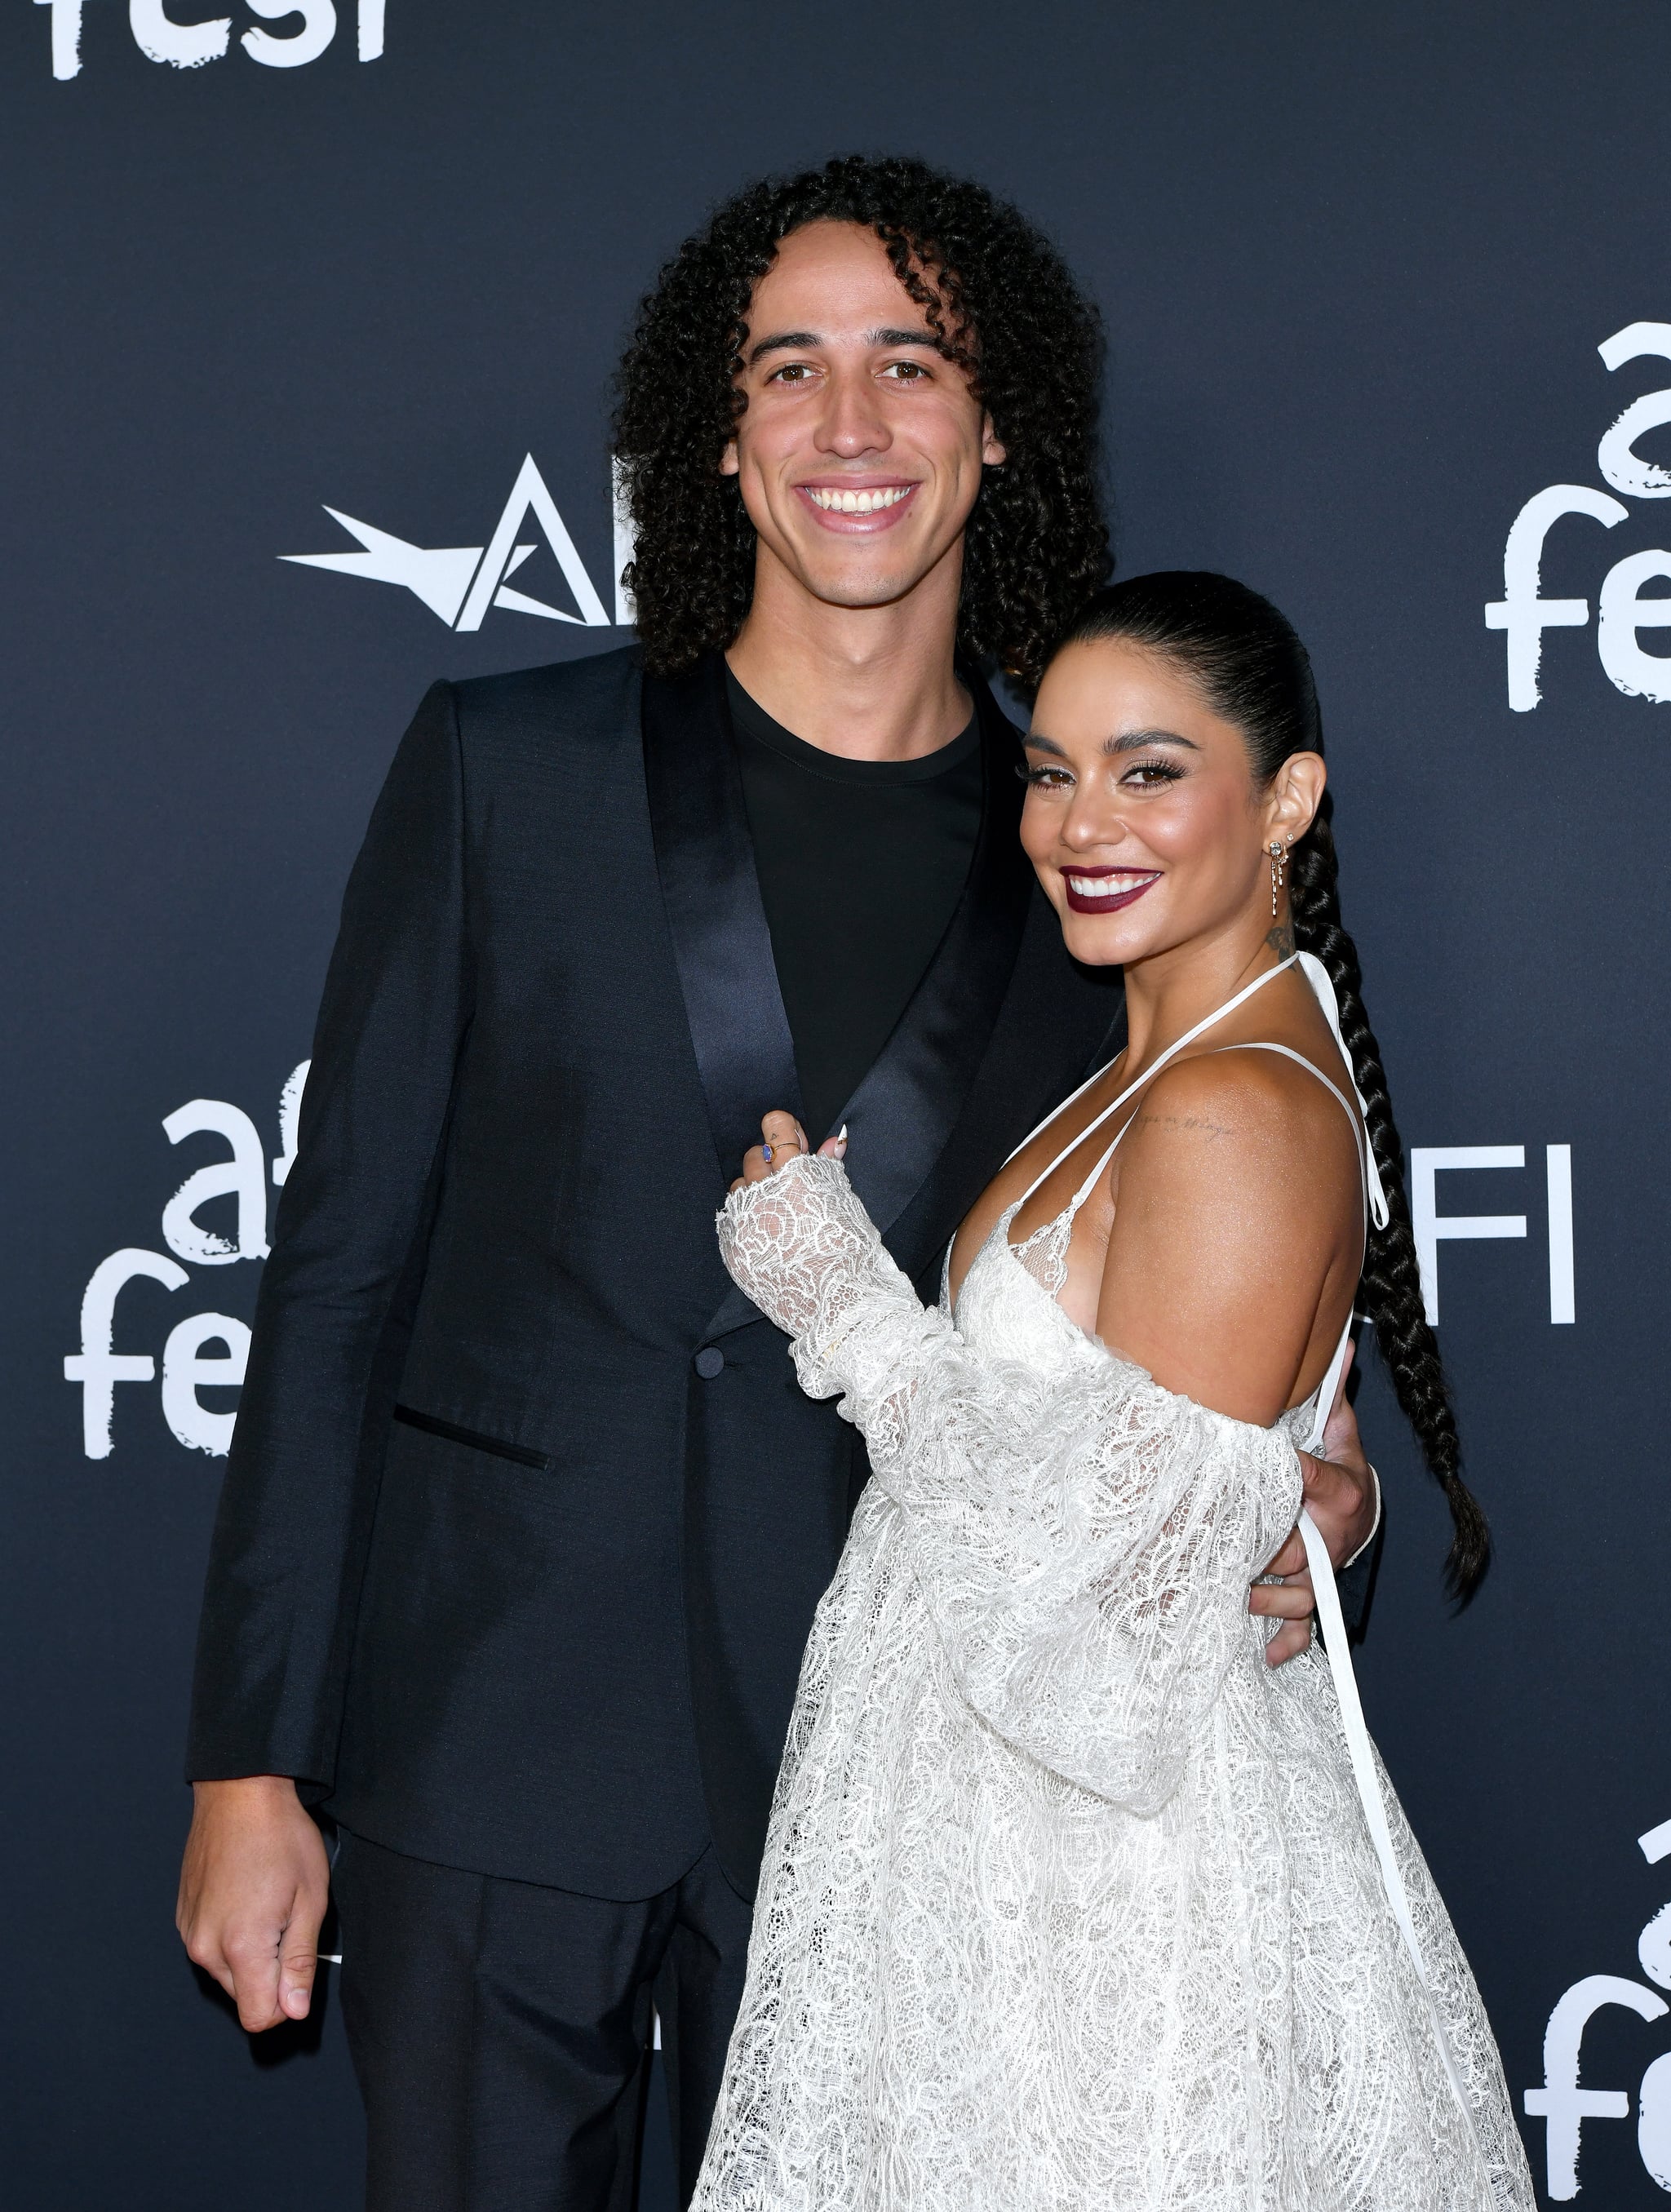 Cole Tucker and Vanessa Hudgens at the 2021 AFI Fest.